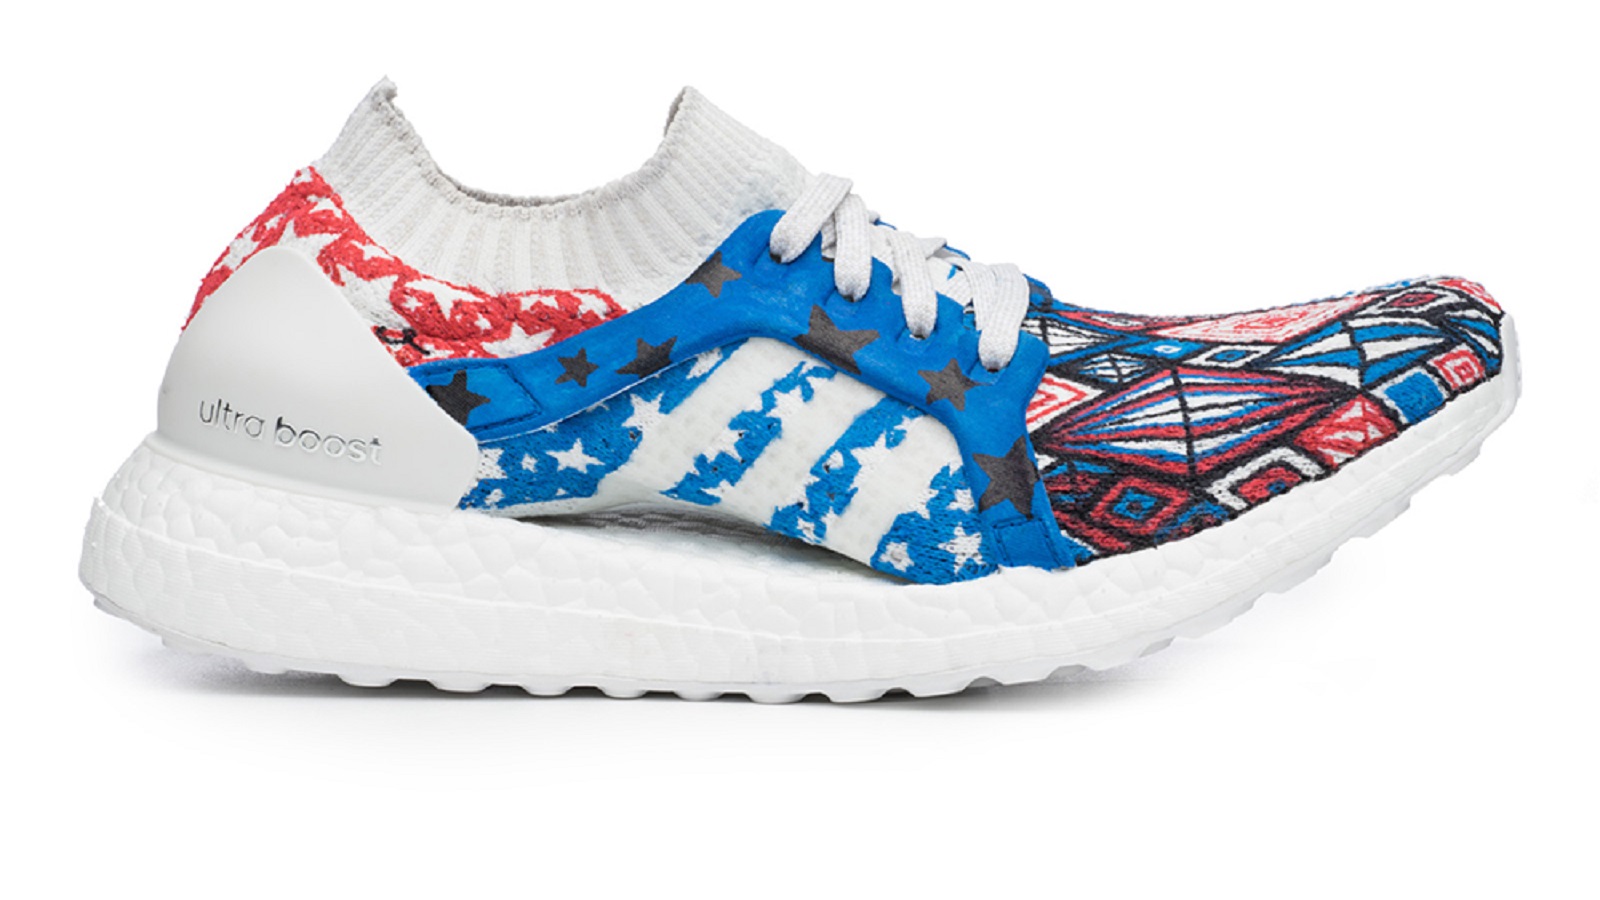 Adidas Sneakers Boost the Image of the US States